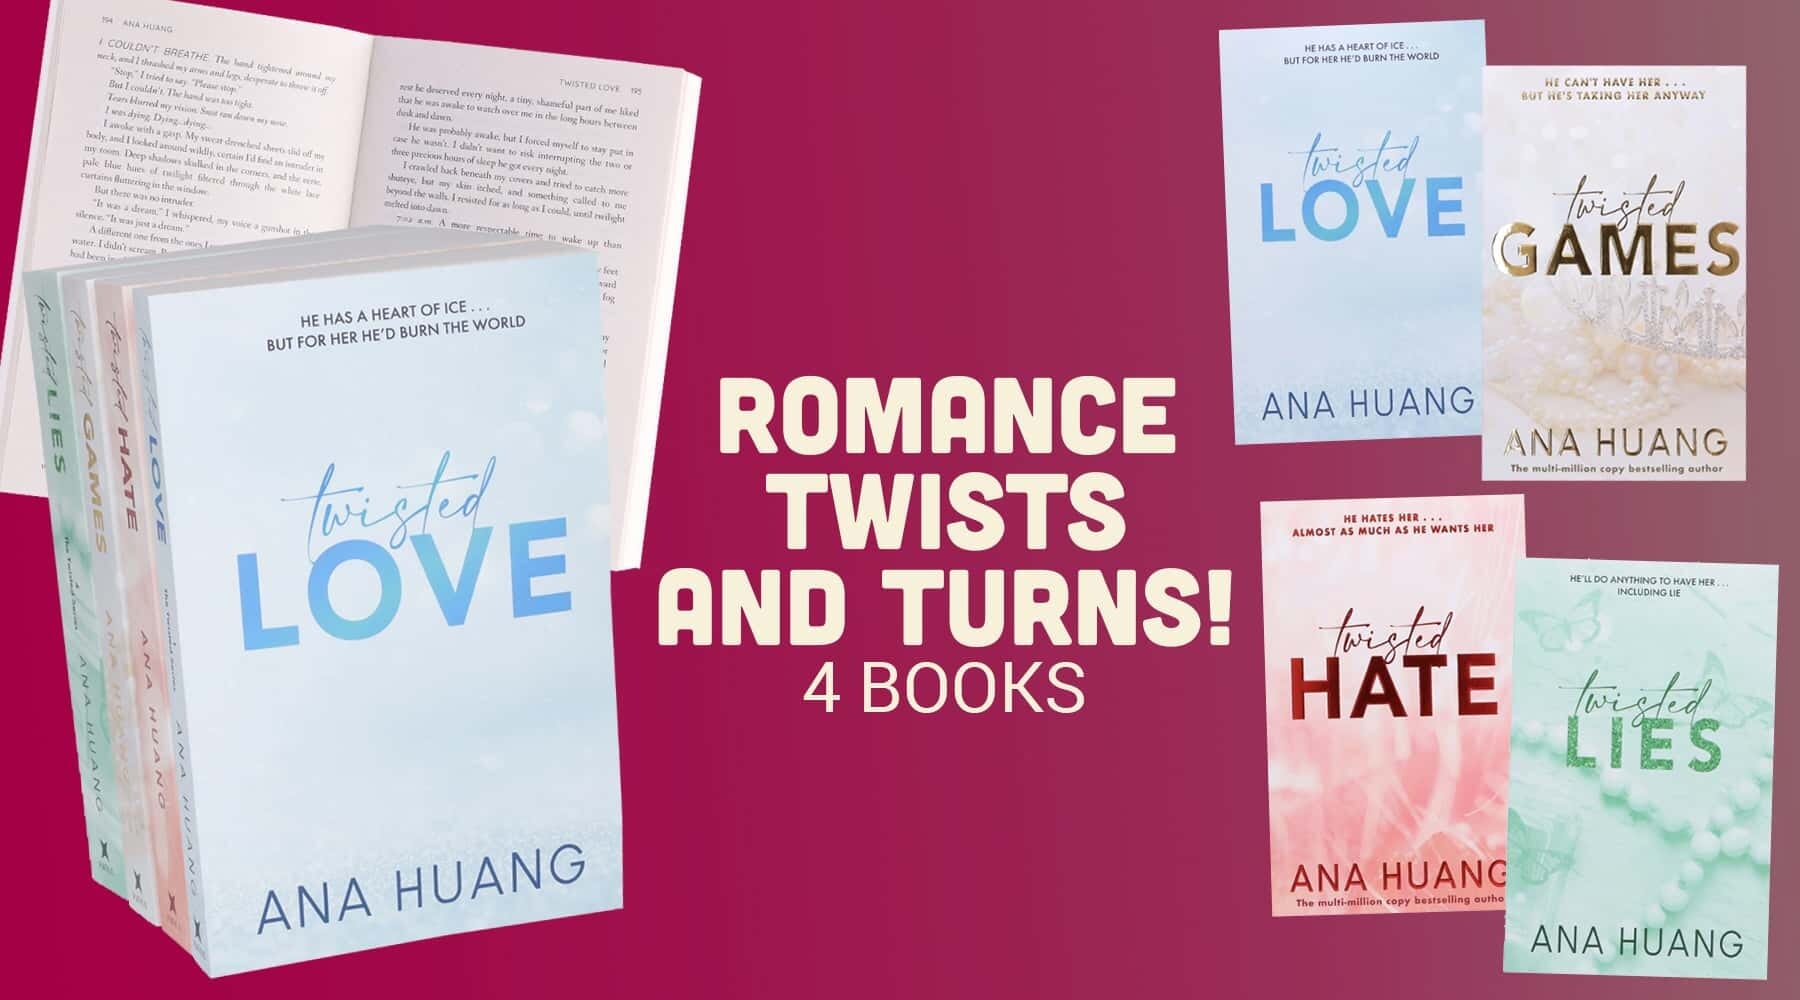 Twisted Hate by Ana Huang - Book Review 